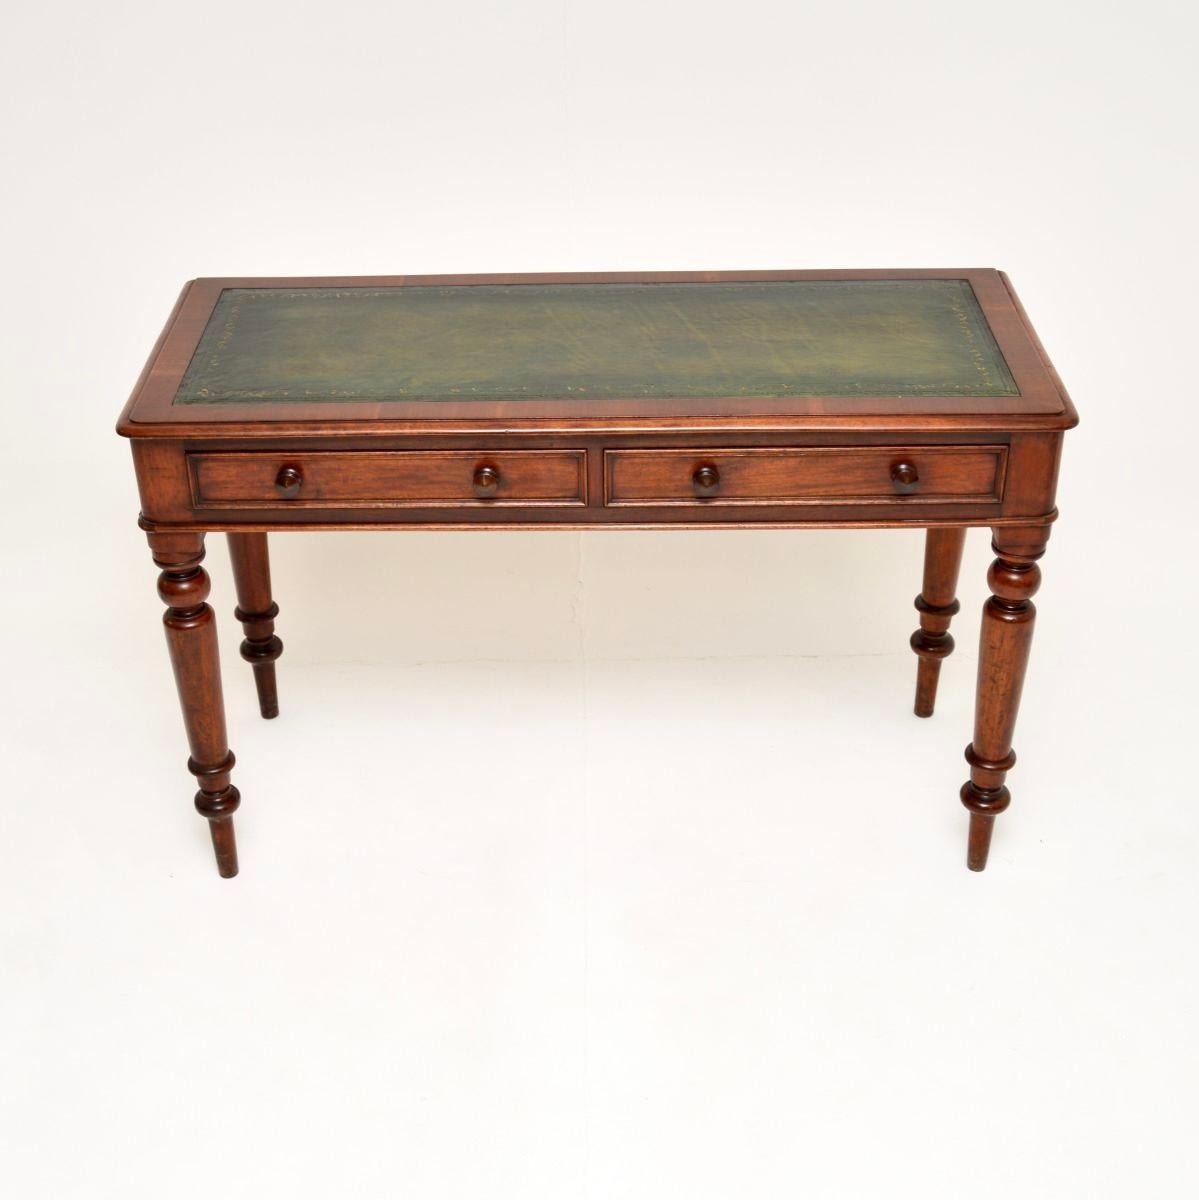 A smart and very well made antique Victorian writing table / desk. This was made in England, it dates from around the 1870-1880 period.

It is of superb quality and is a very useful size, not too deep from front to back. The inset leather writing